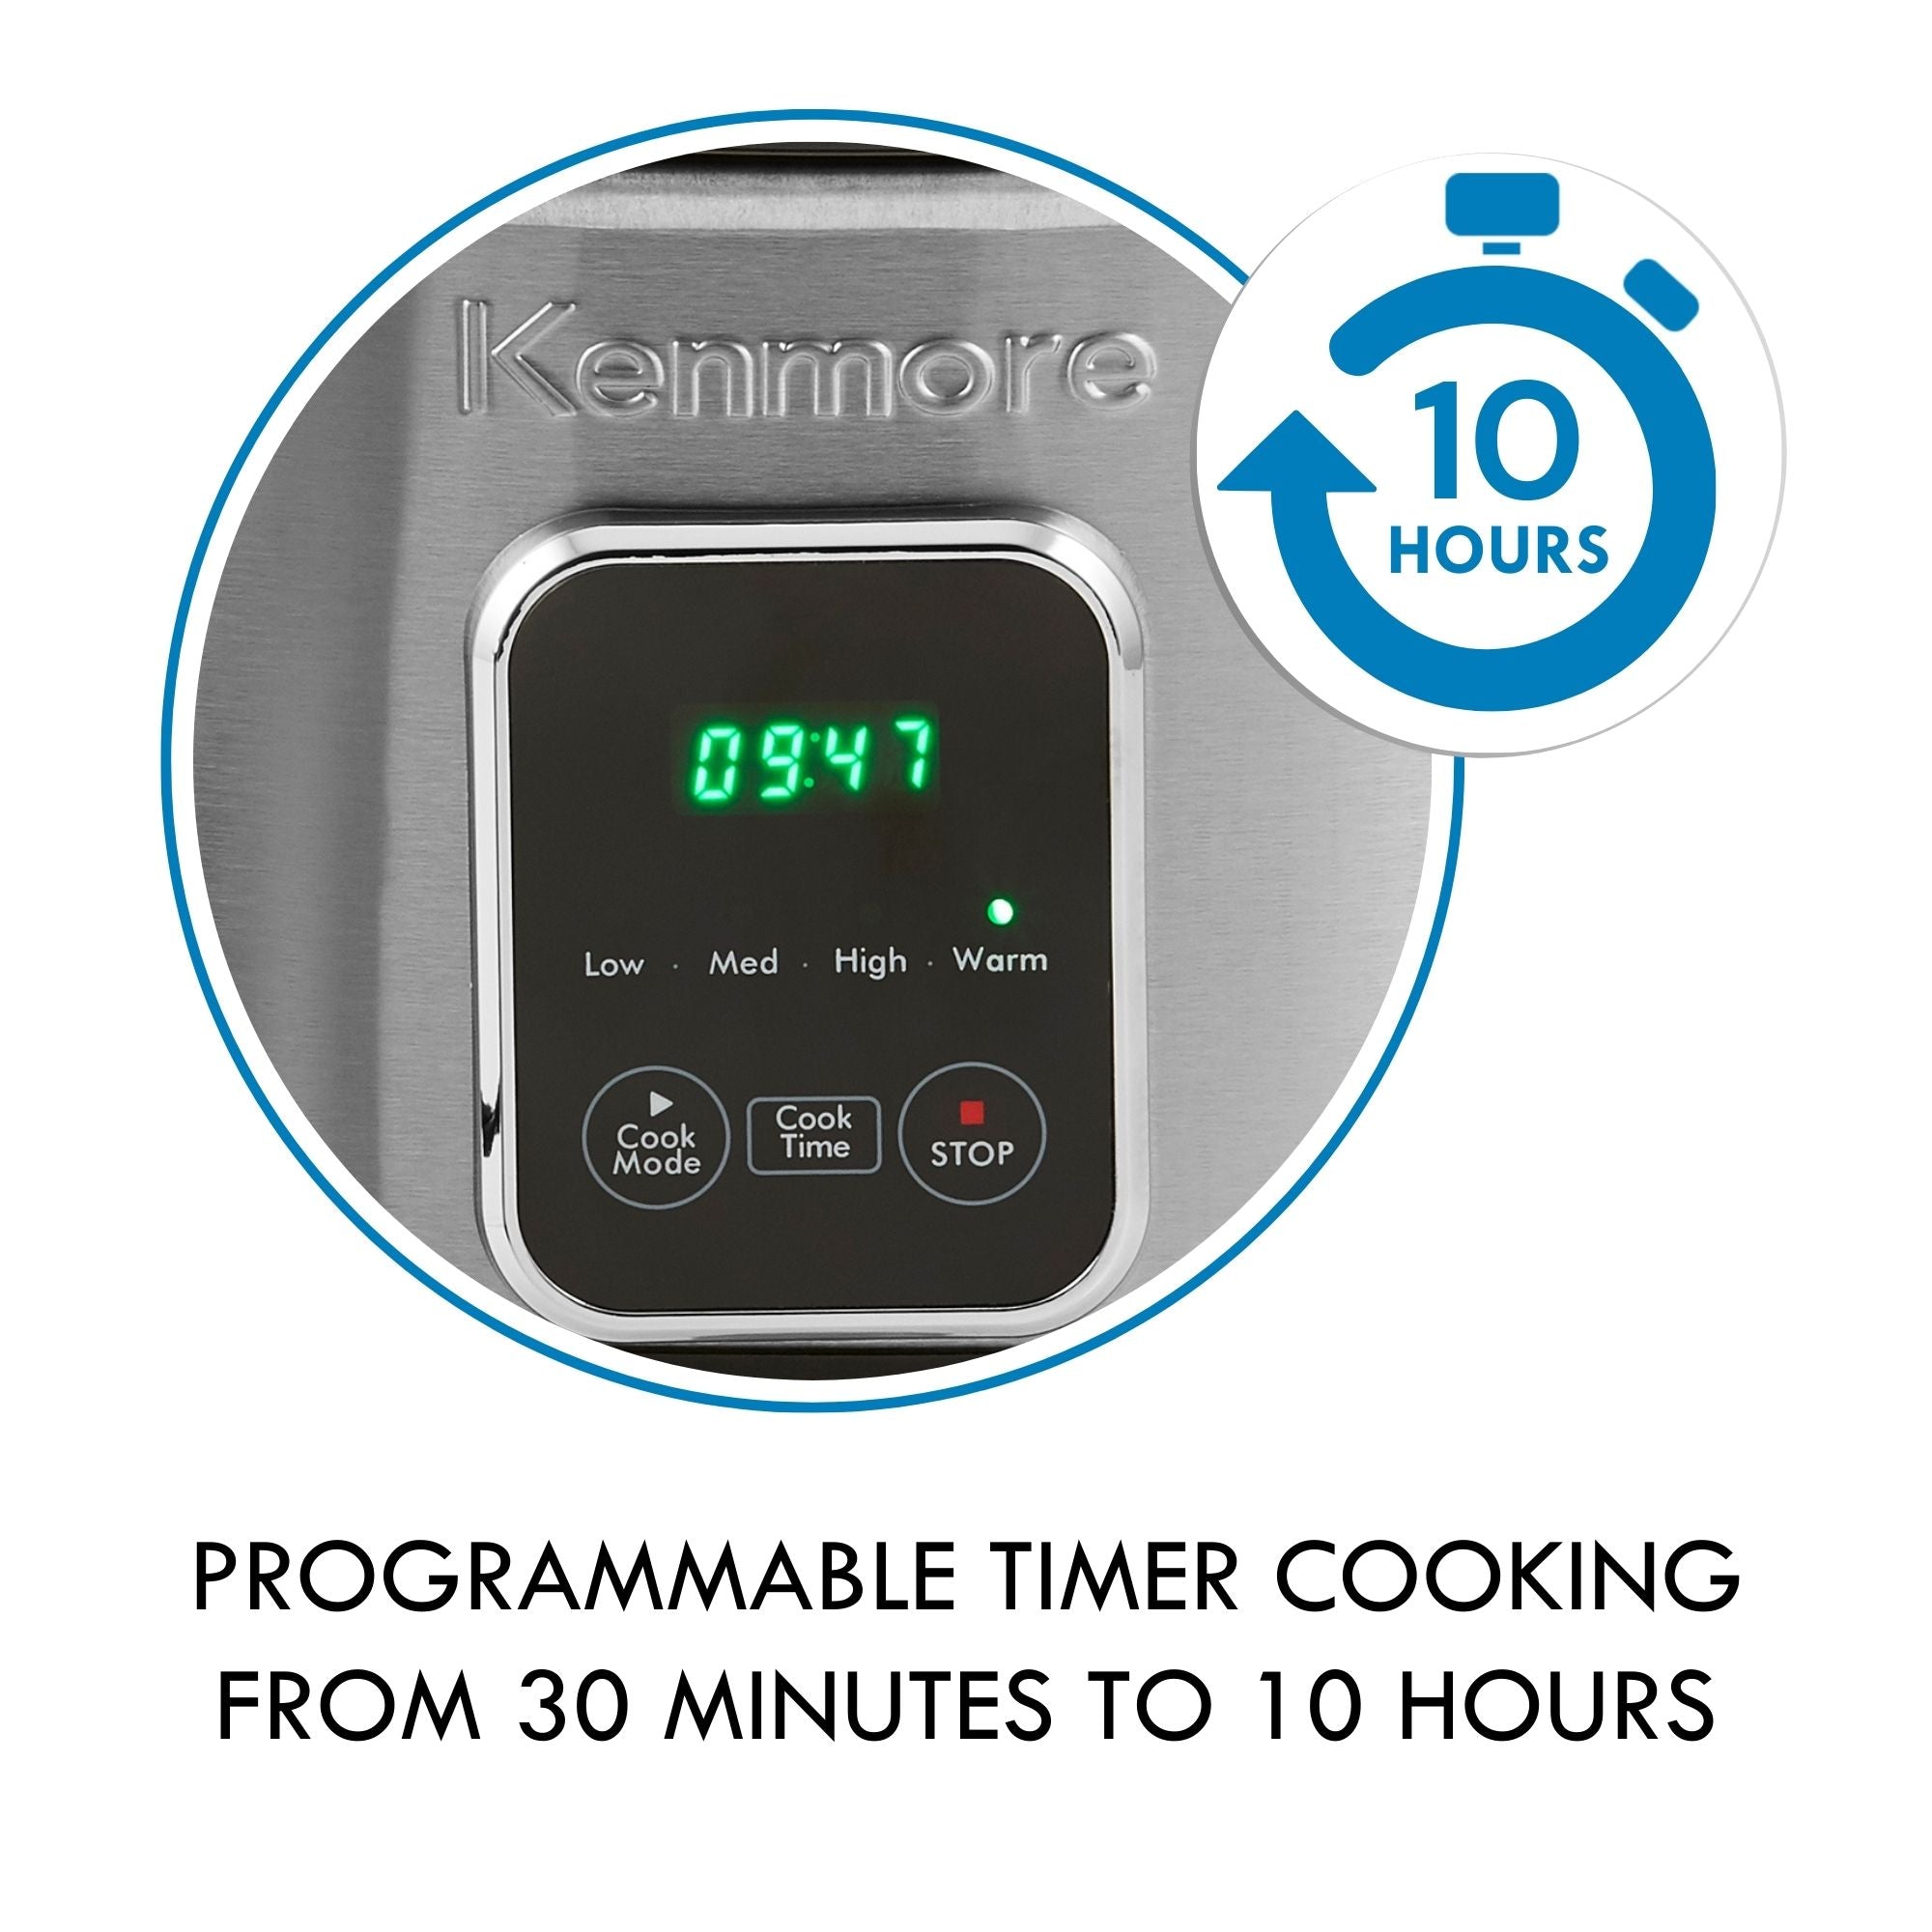 Closeup image of control panel and digital display with "10 hours" icon overlaid and text below reading, "Programmable timer cooking from 30 minutes to 10 hours"